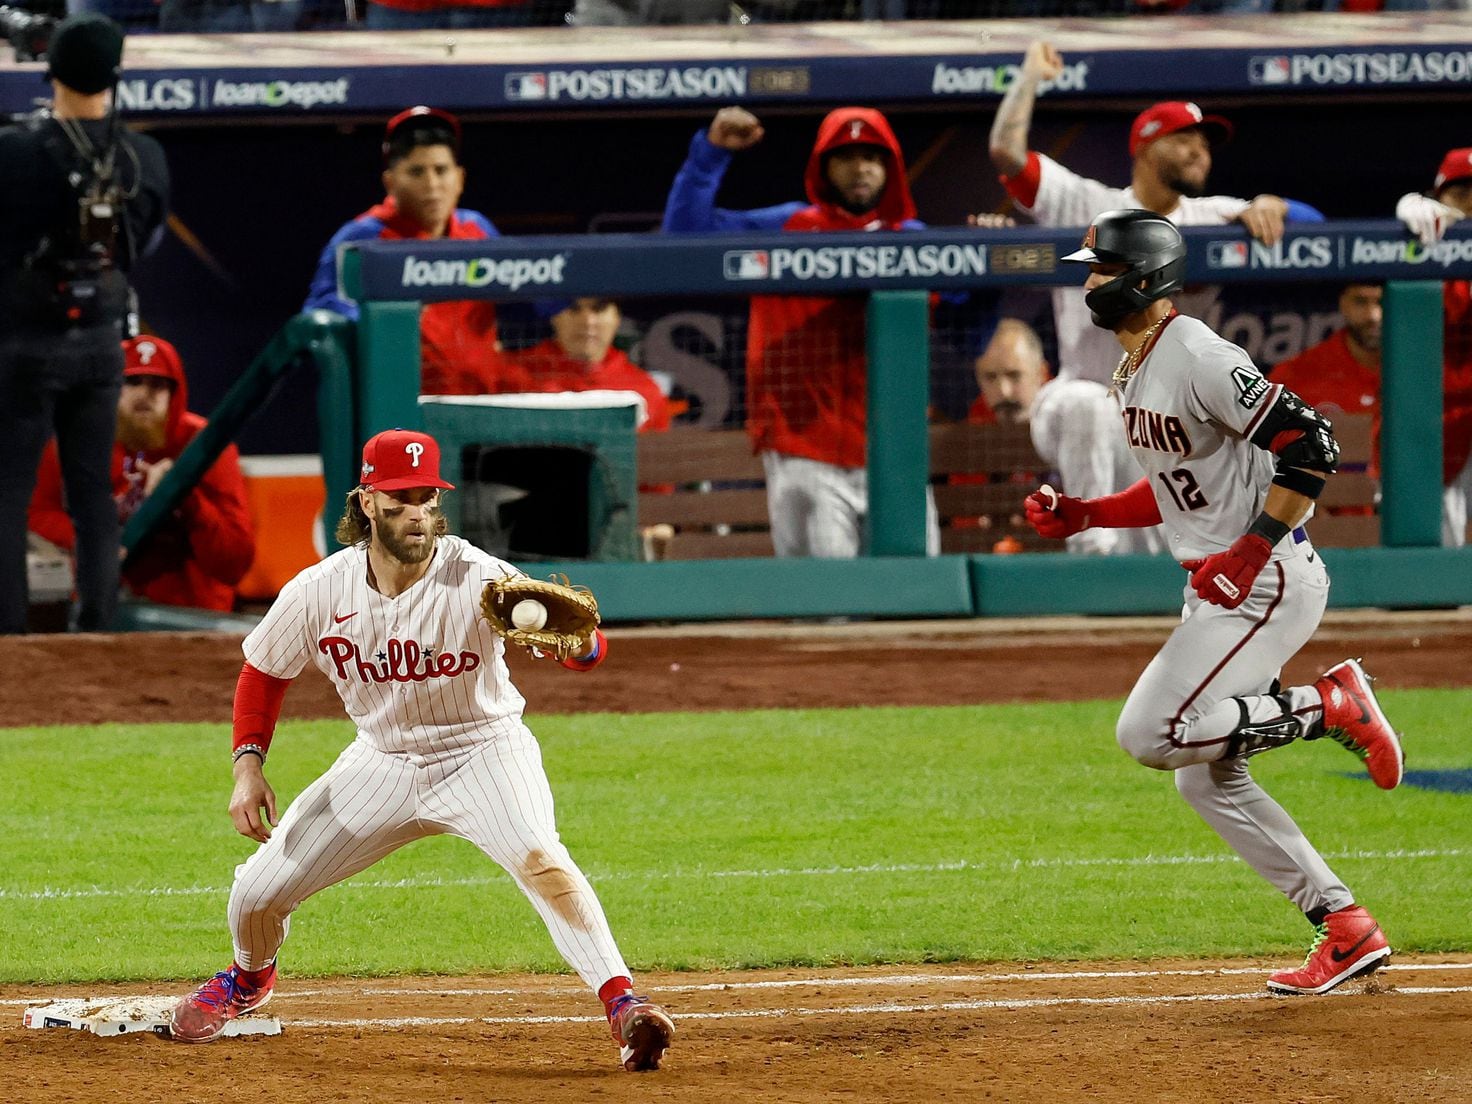 Watch Bryce Harper and others react to Phillies Game 3 win